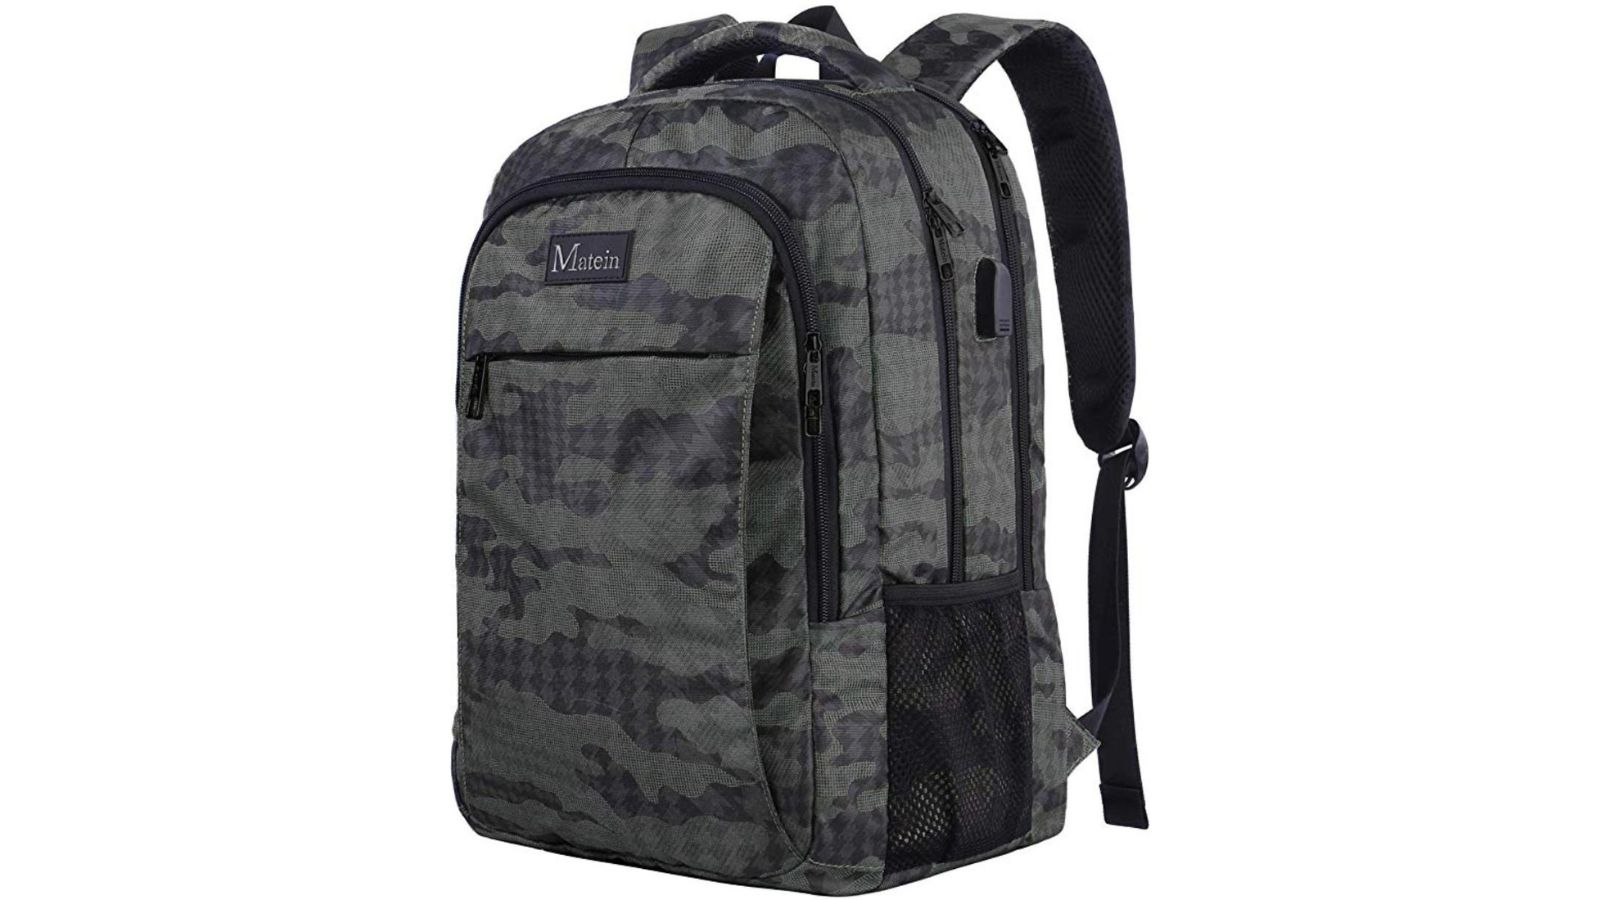 Matein Backpack Student